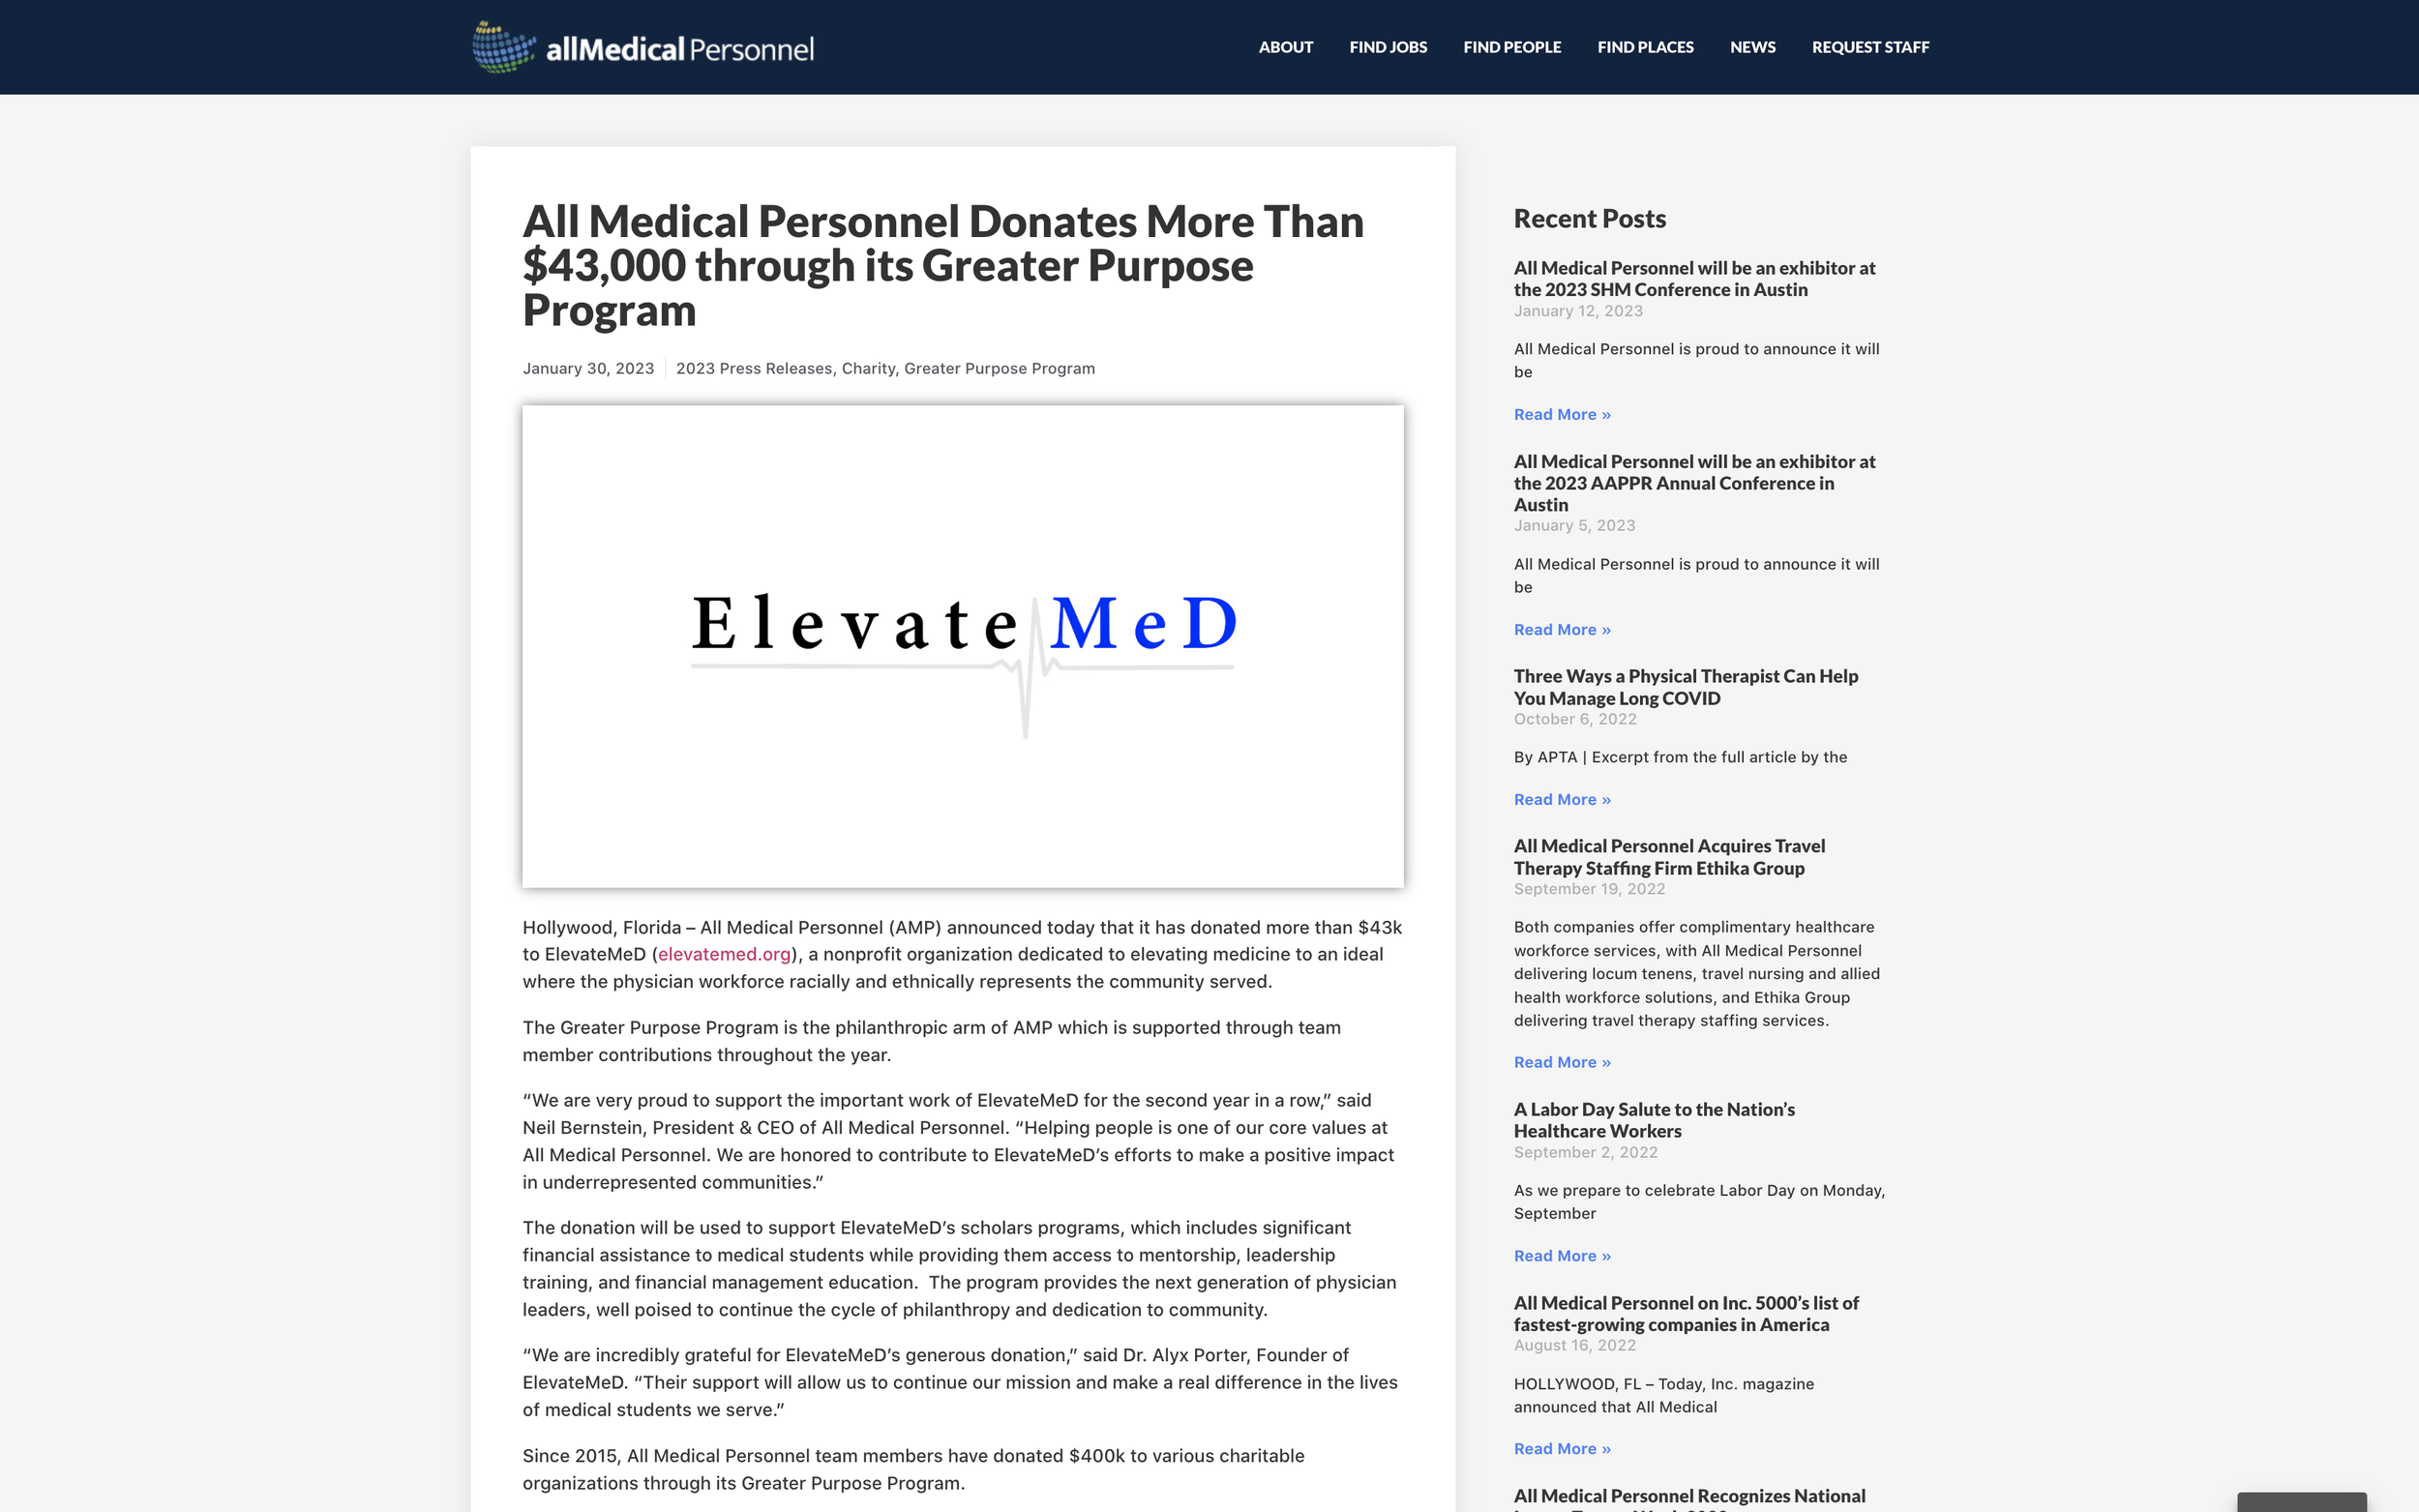 All Medical Personnel Donates More Than $43K to ElevateMeD